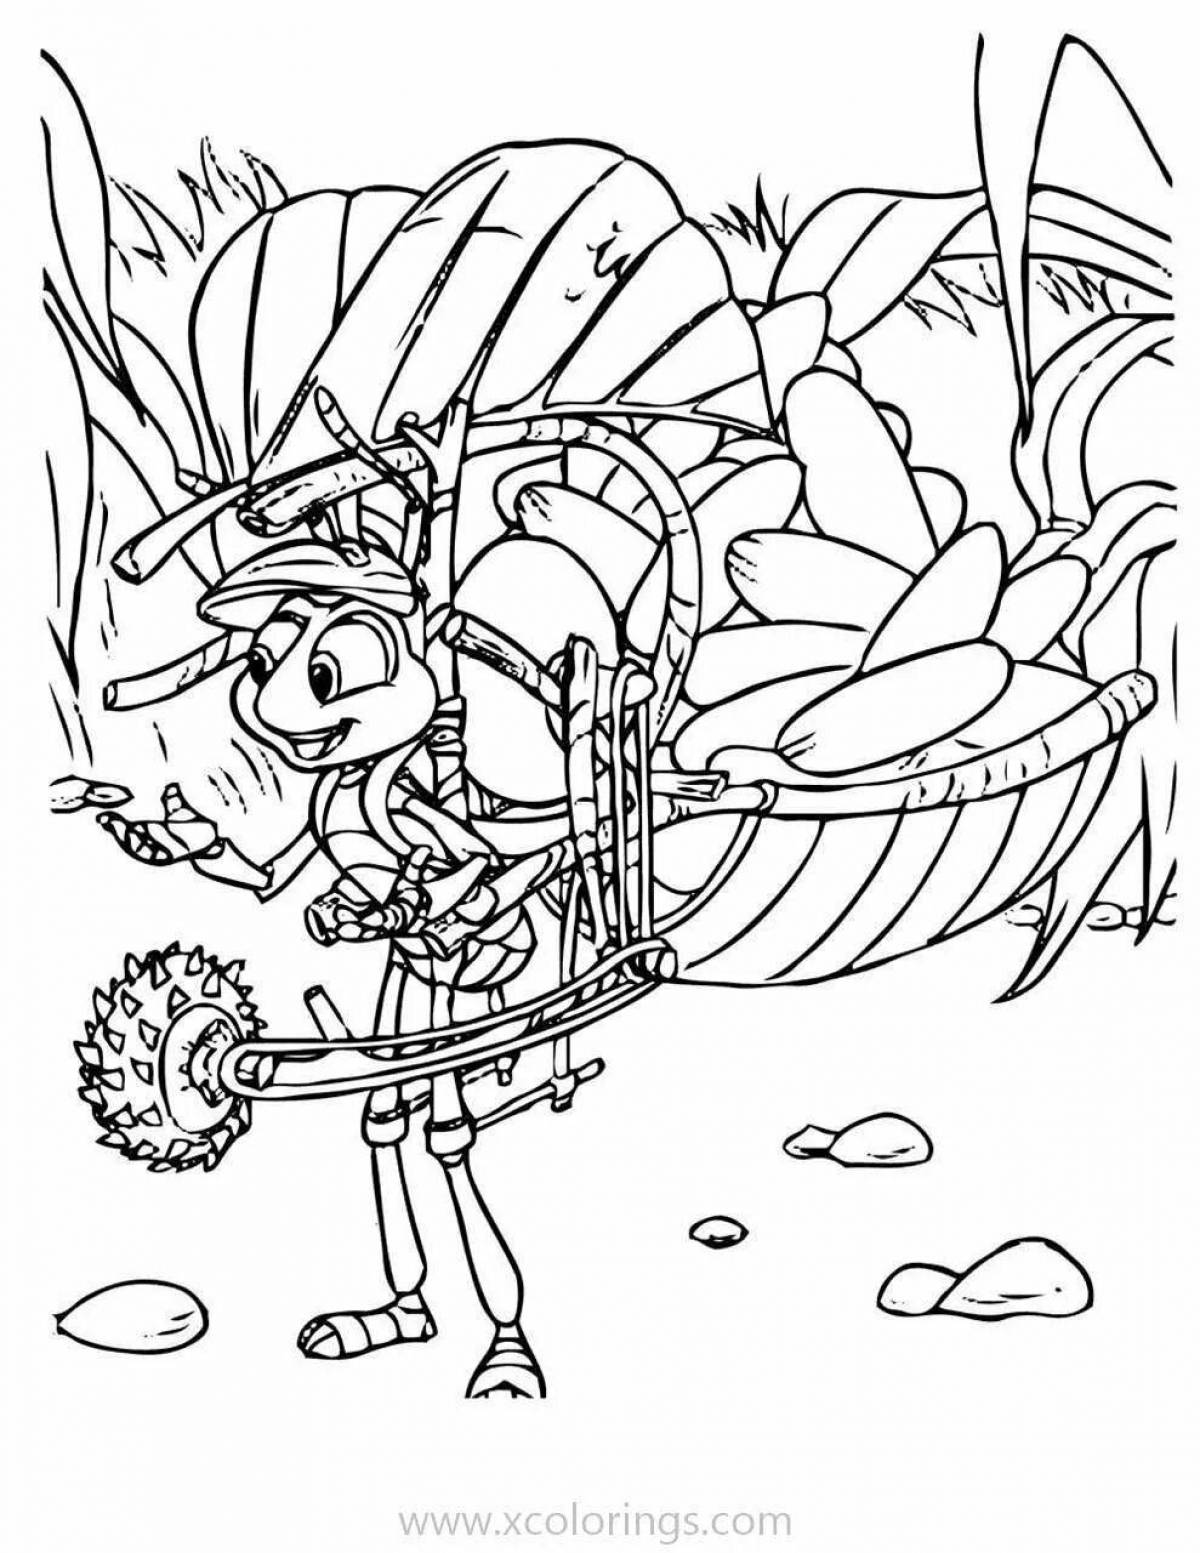 Animated dragonfly and ant coloring page